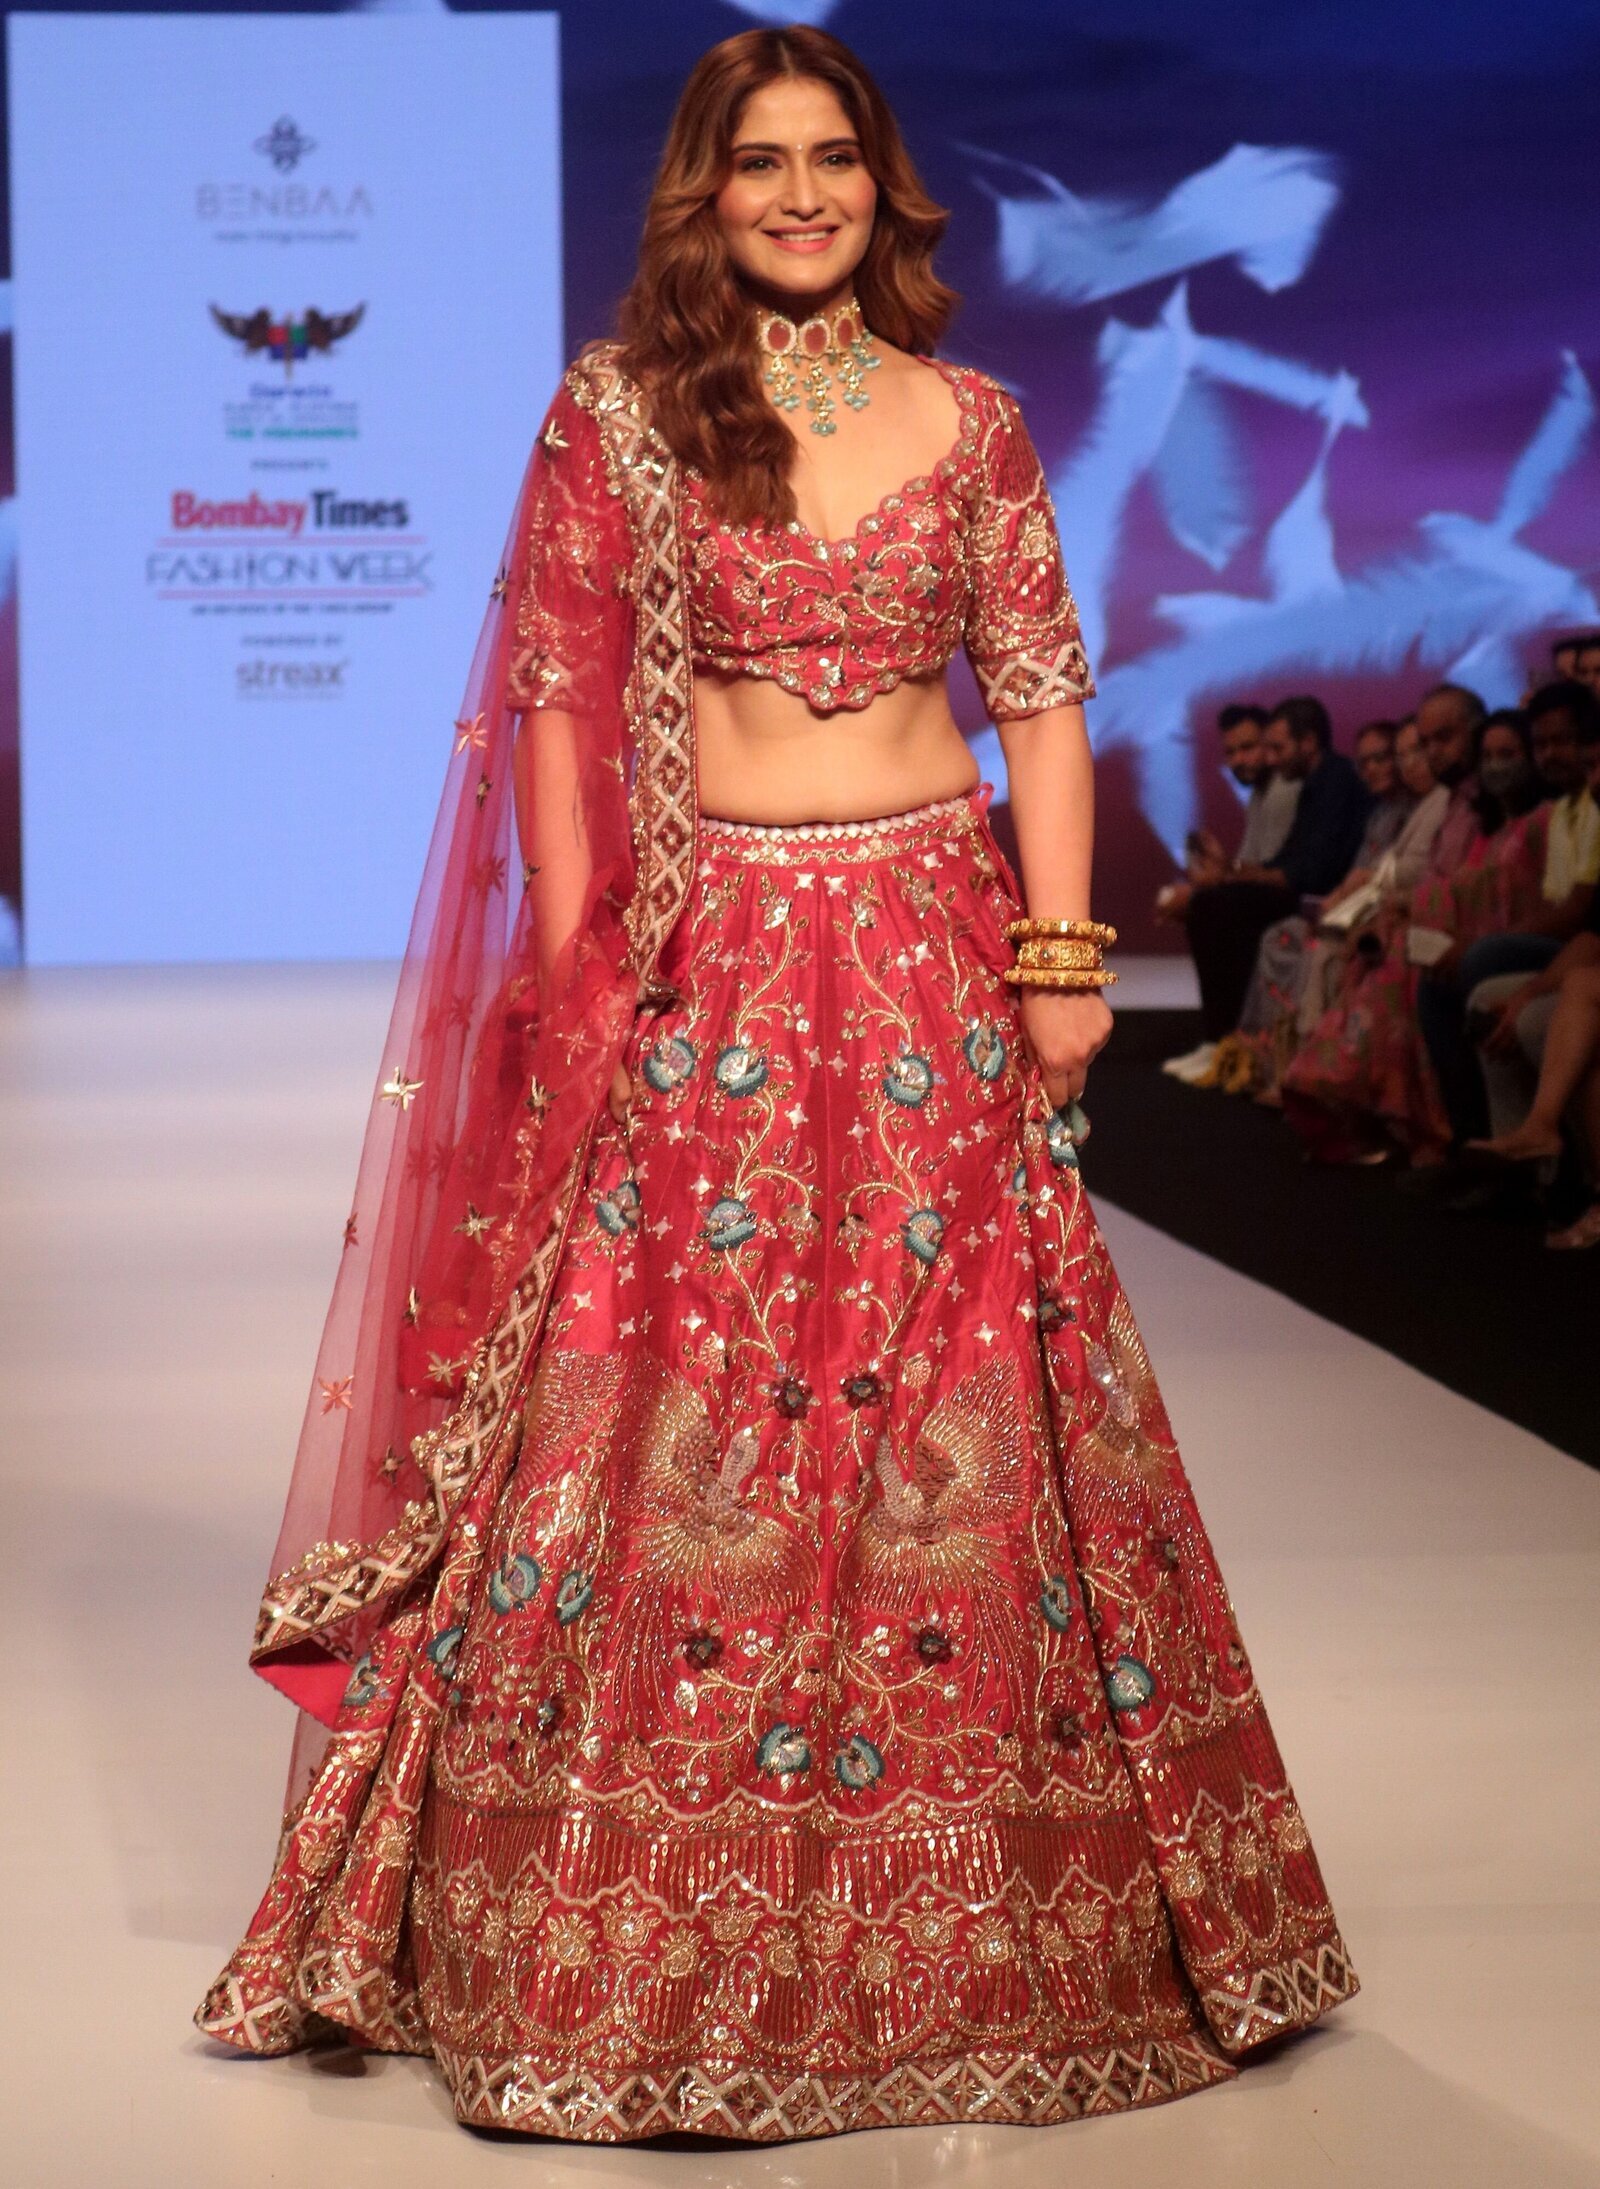 Aarti Singh - Photos: Celebs Walks The Ramp At Bombay Times Fashion Week 2021 | Picture 1828719